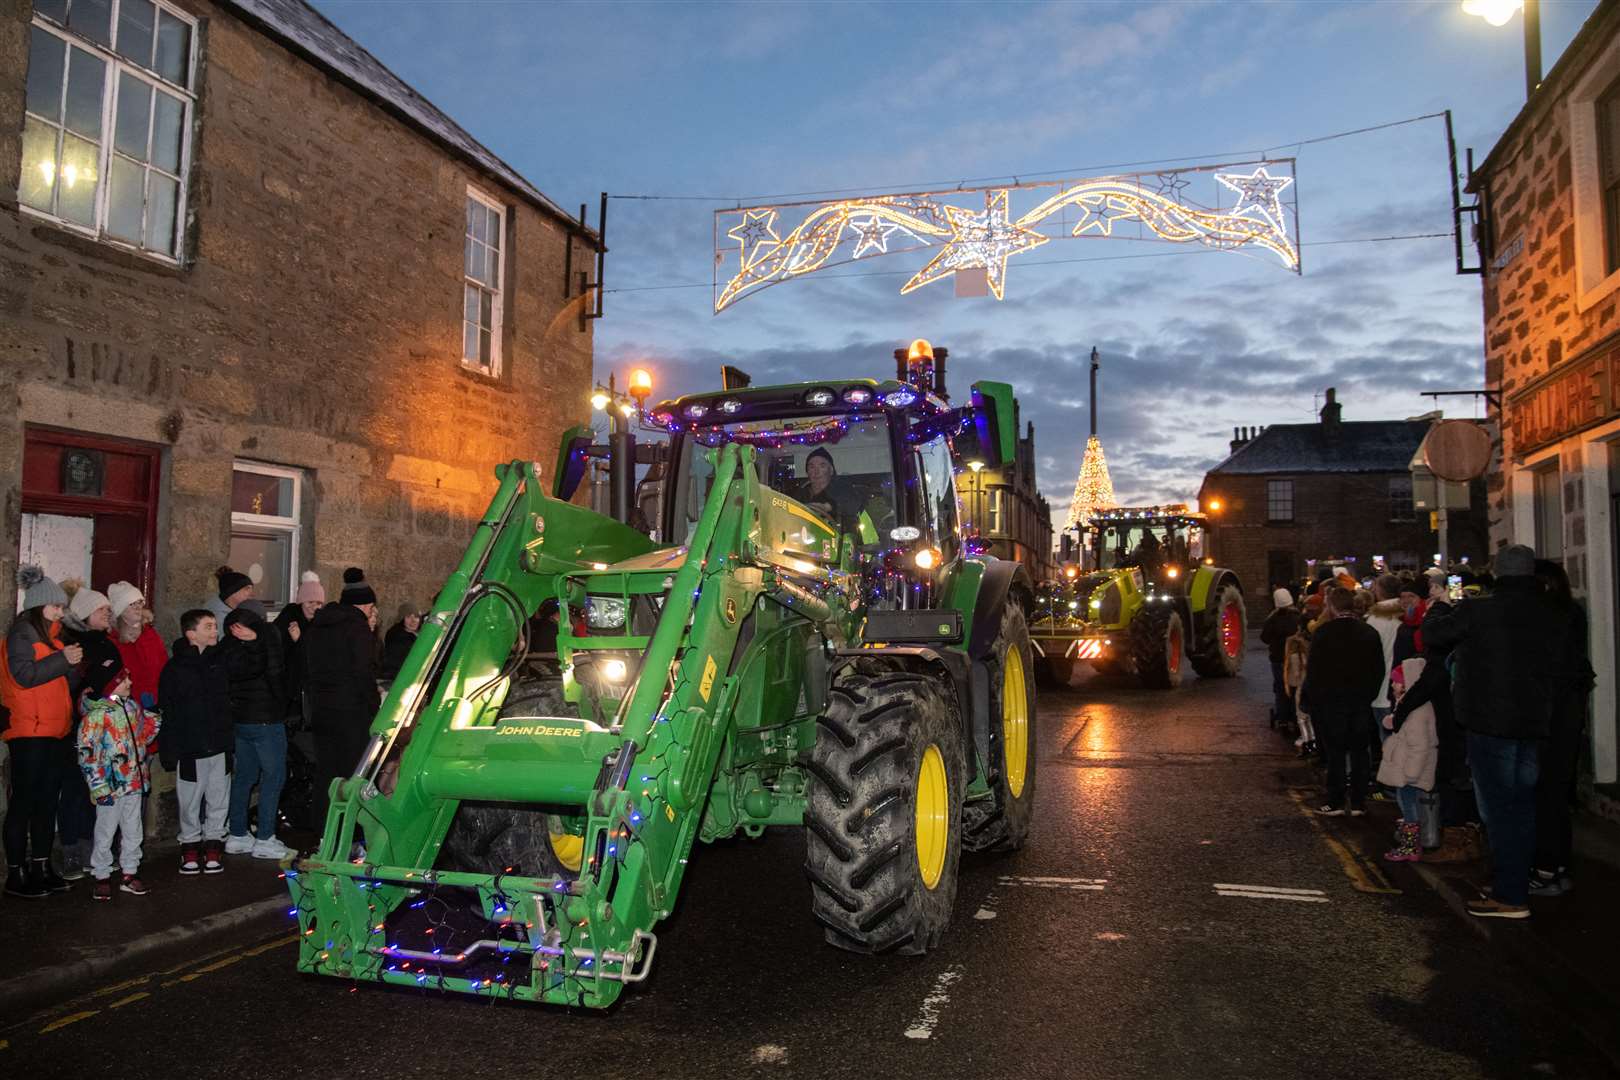 The festive tractor and lorry run make their way through the crowds. Picture: Daniel Forsyth